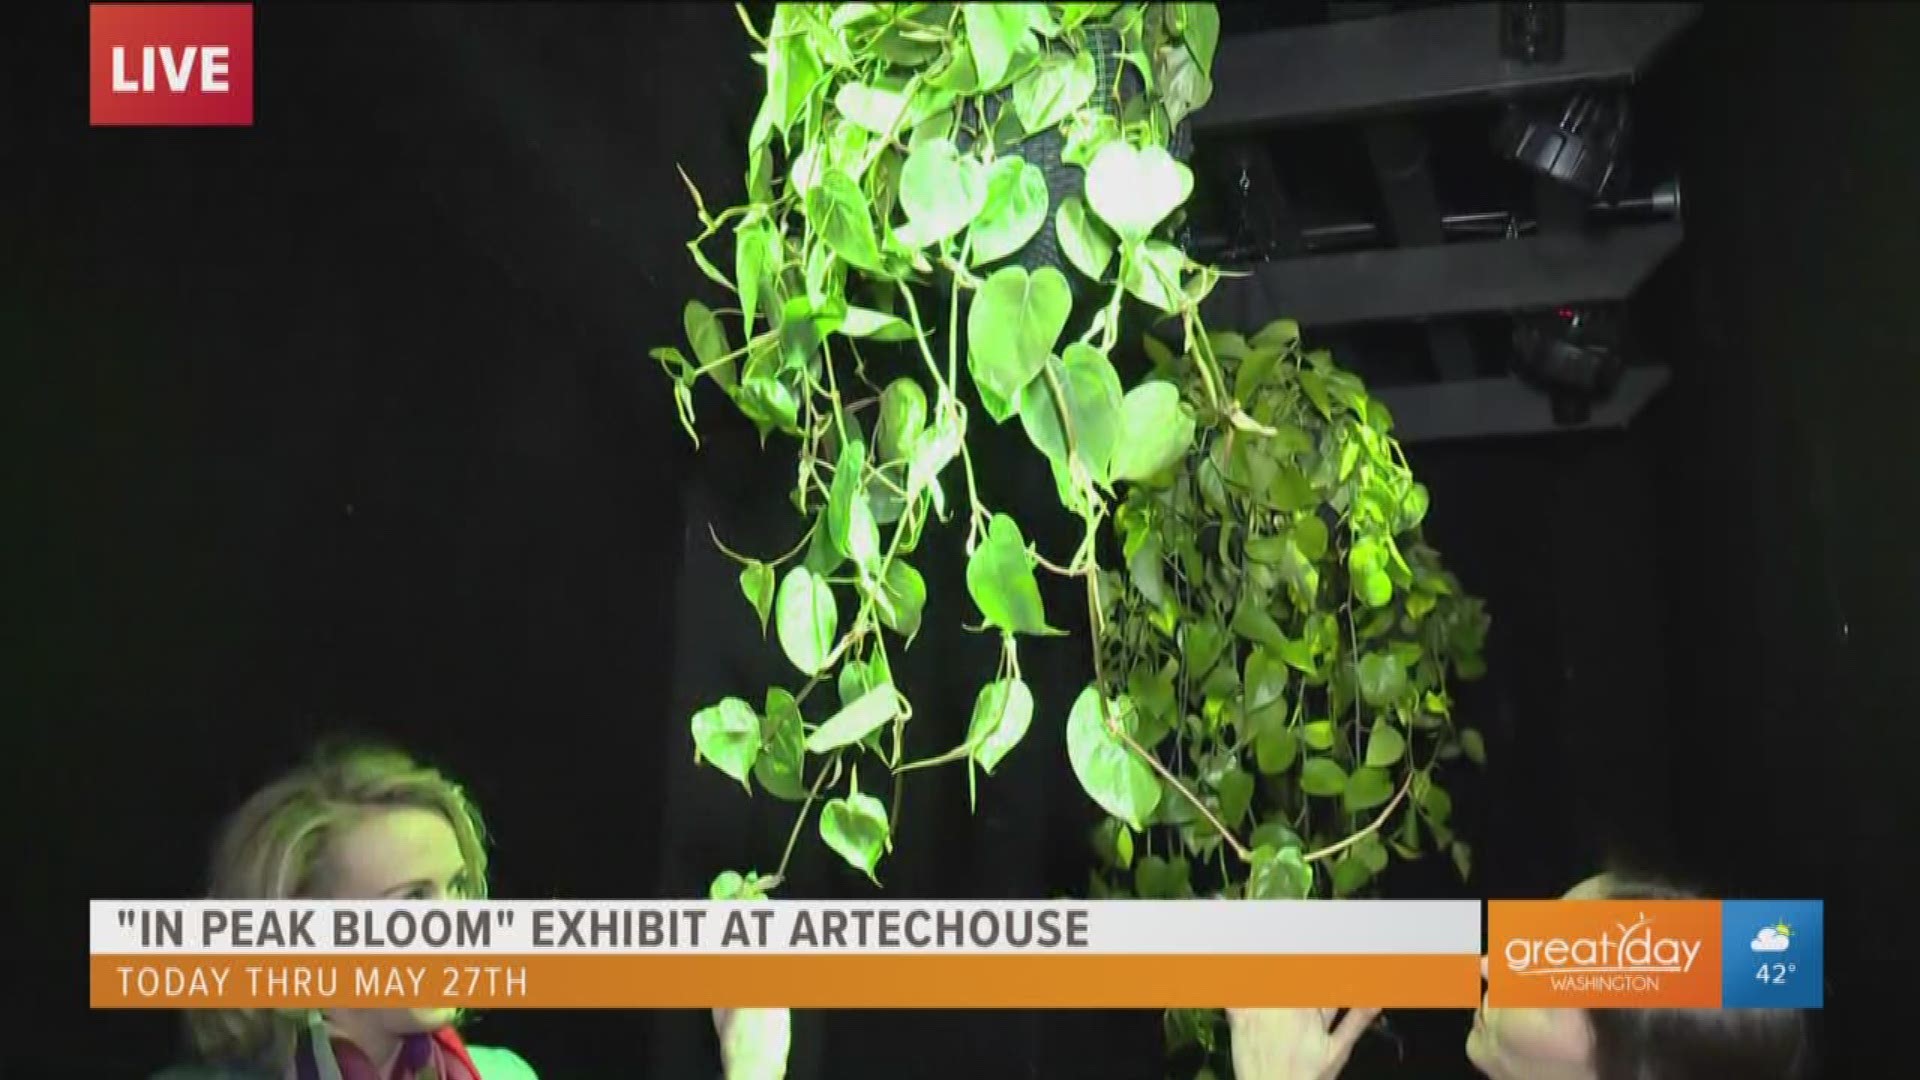 The Artechouse exhibit "In Peak Bloom" showcases high-tech, interactive artwork with a spring theme and even includes 'talking plants'.